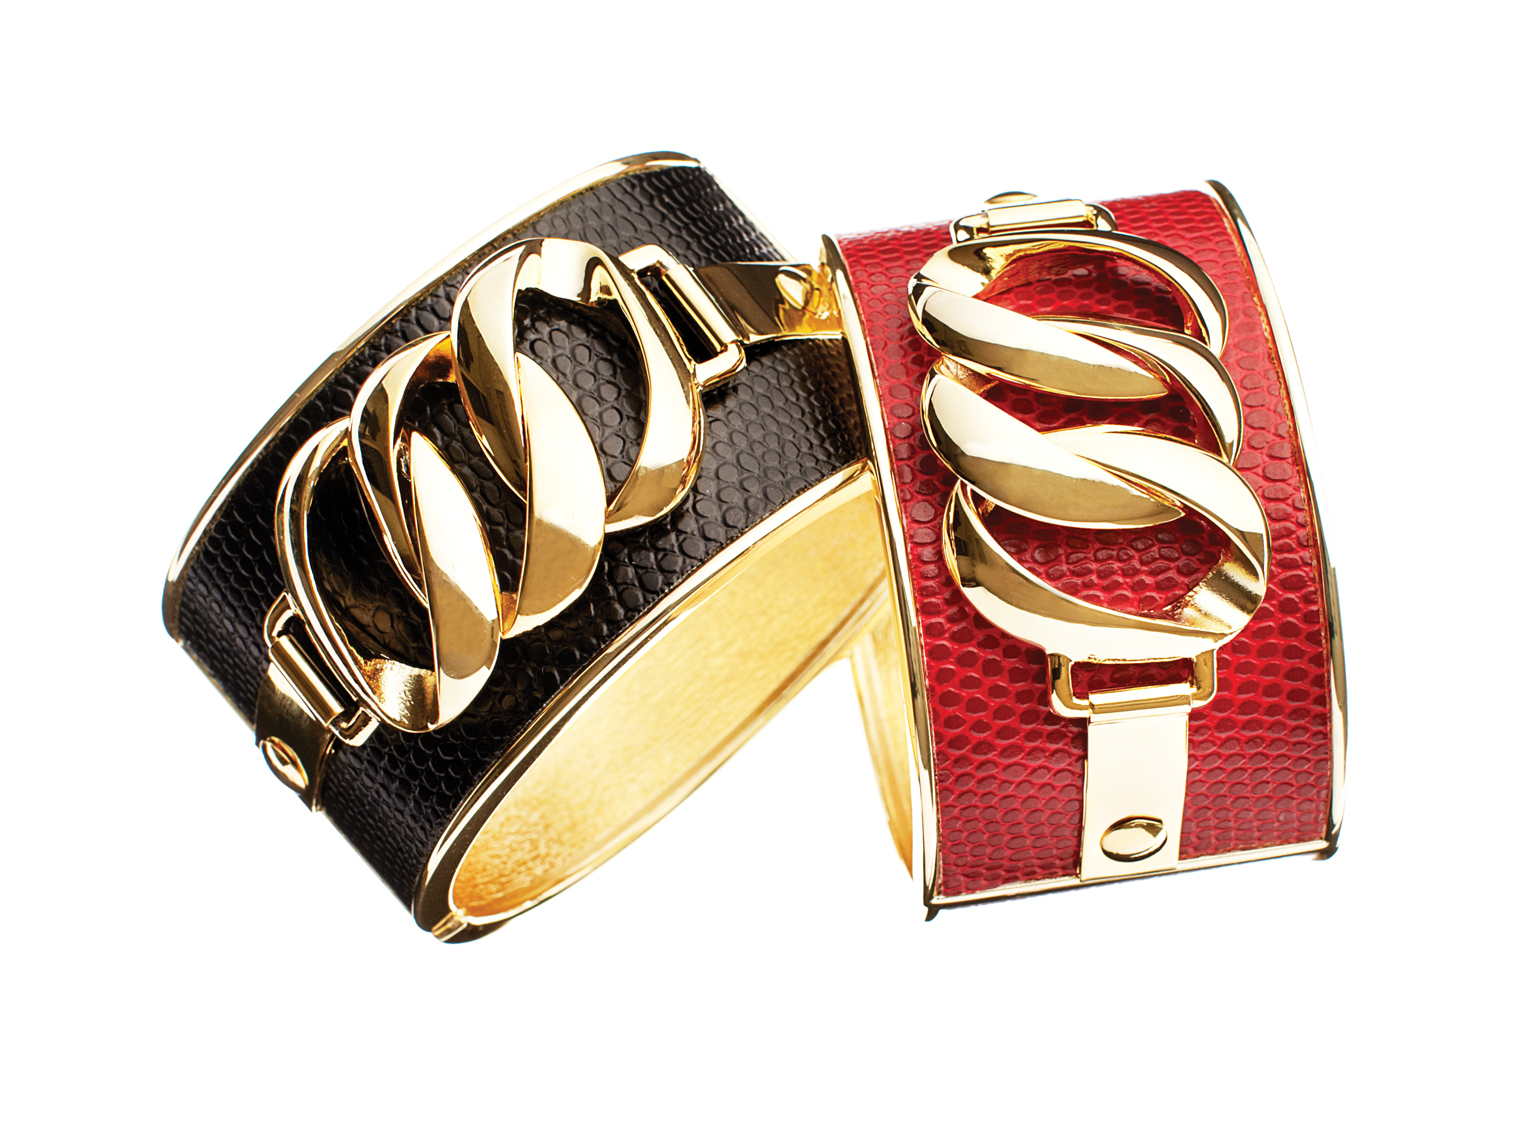 Red and black Laura cuffs